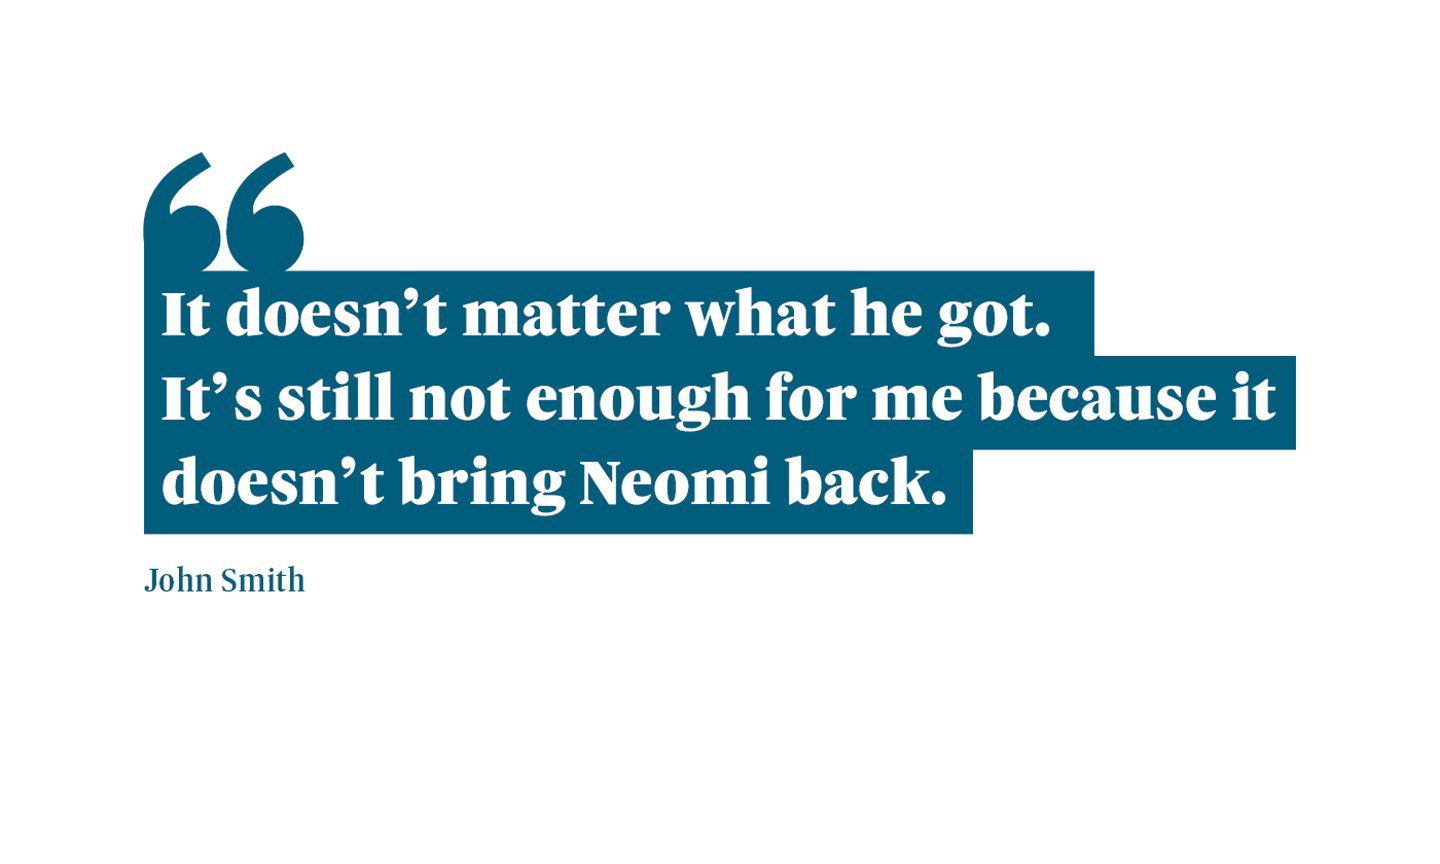 A quote from John Smith, Neomi Smith's dad, which says: “It doesn’t matter what he got. It’s still not enough for me because it doesn’t bring Neomi back."